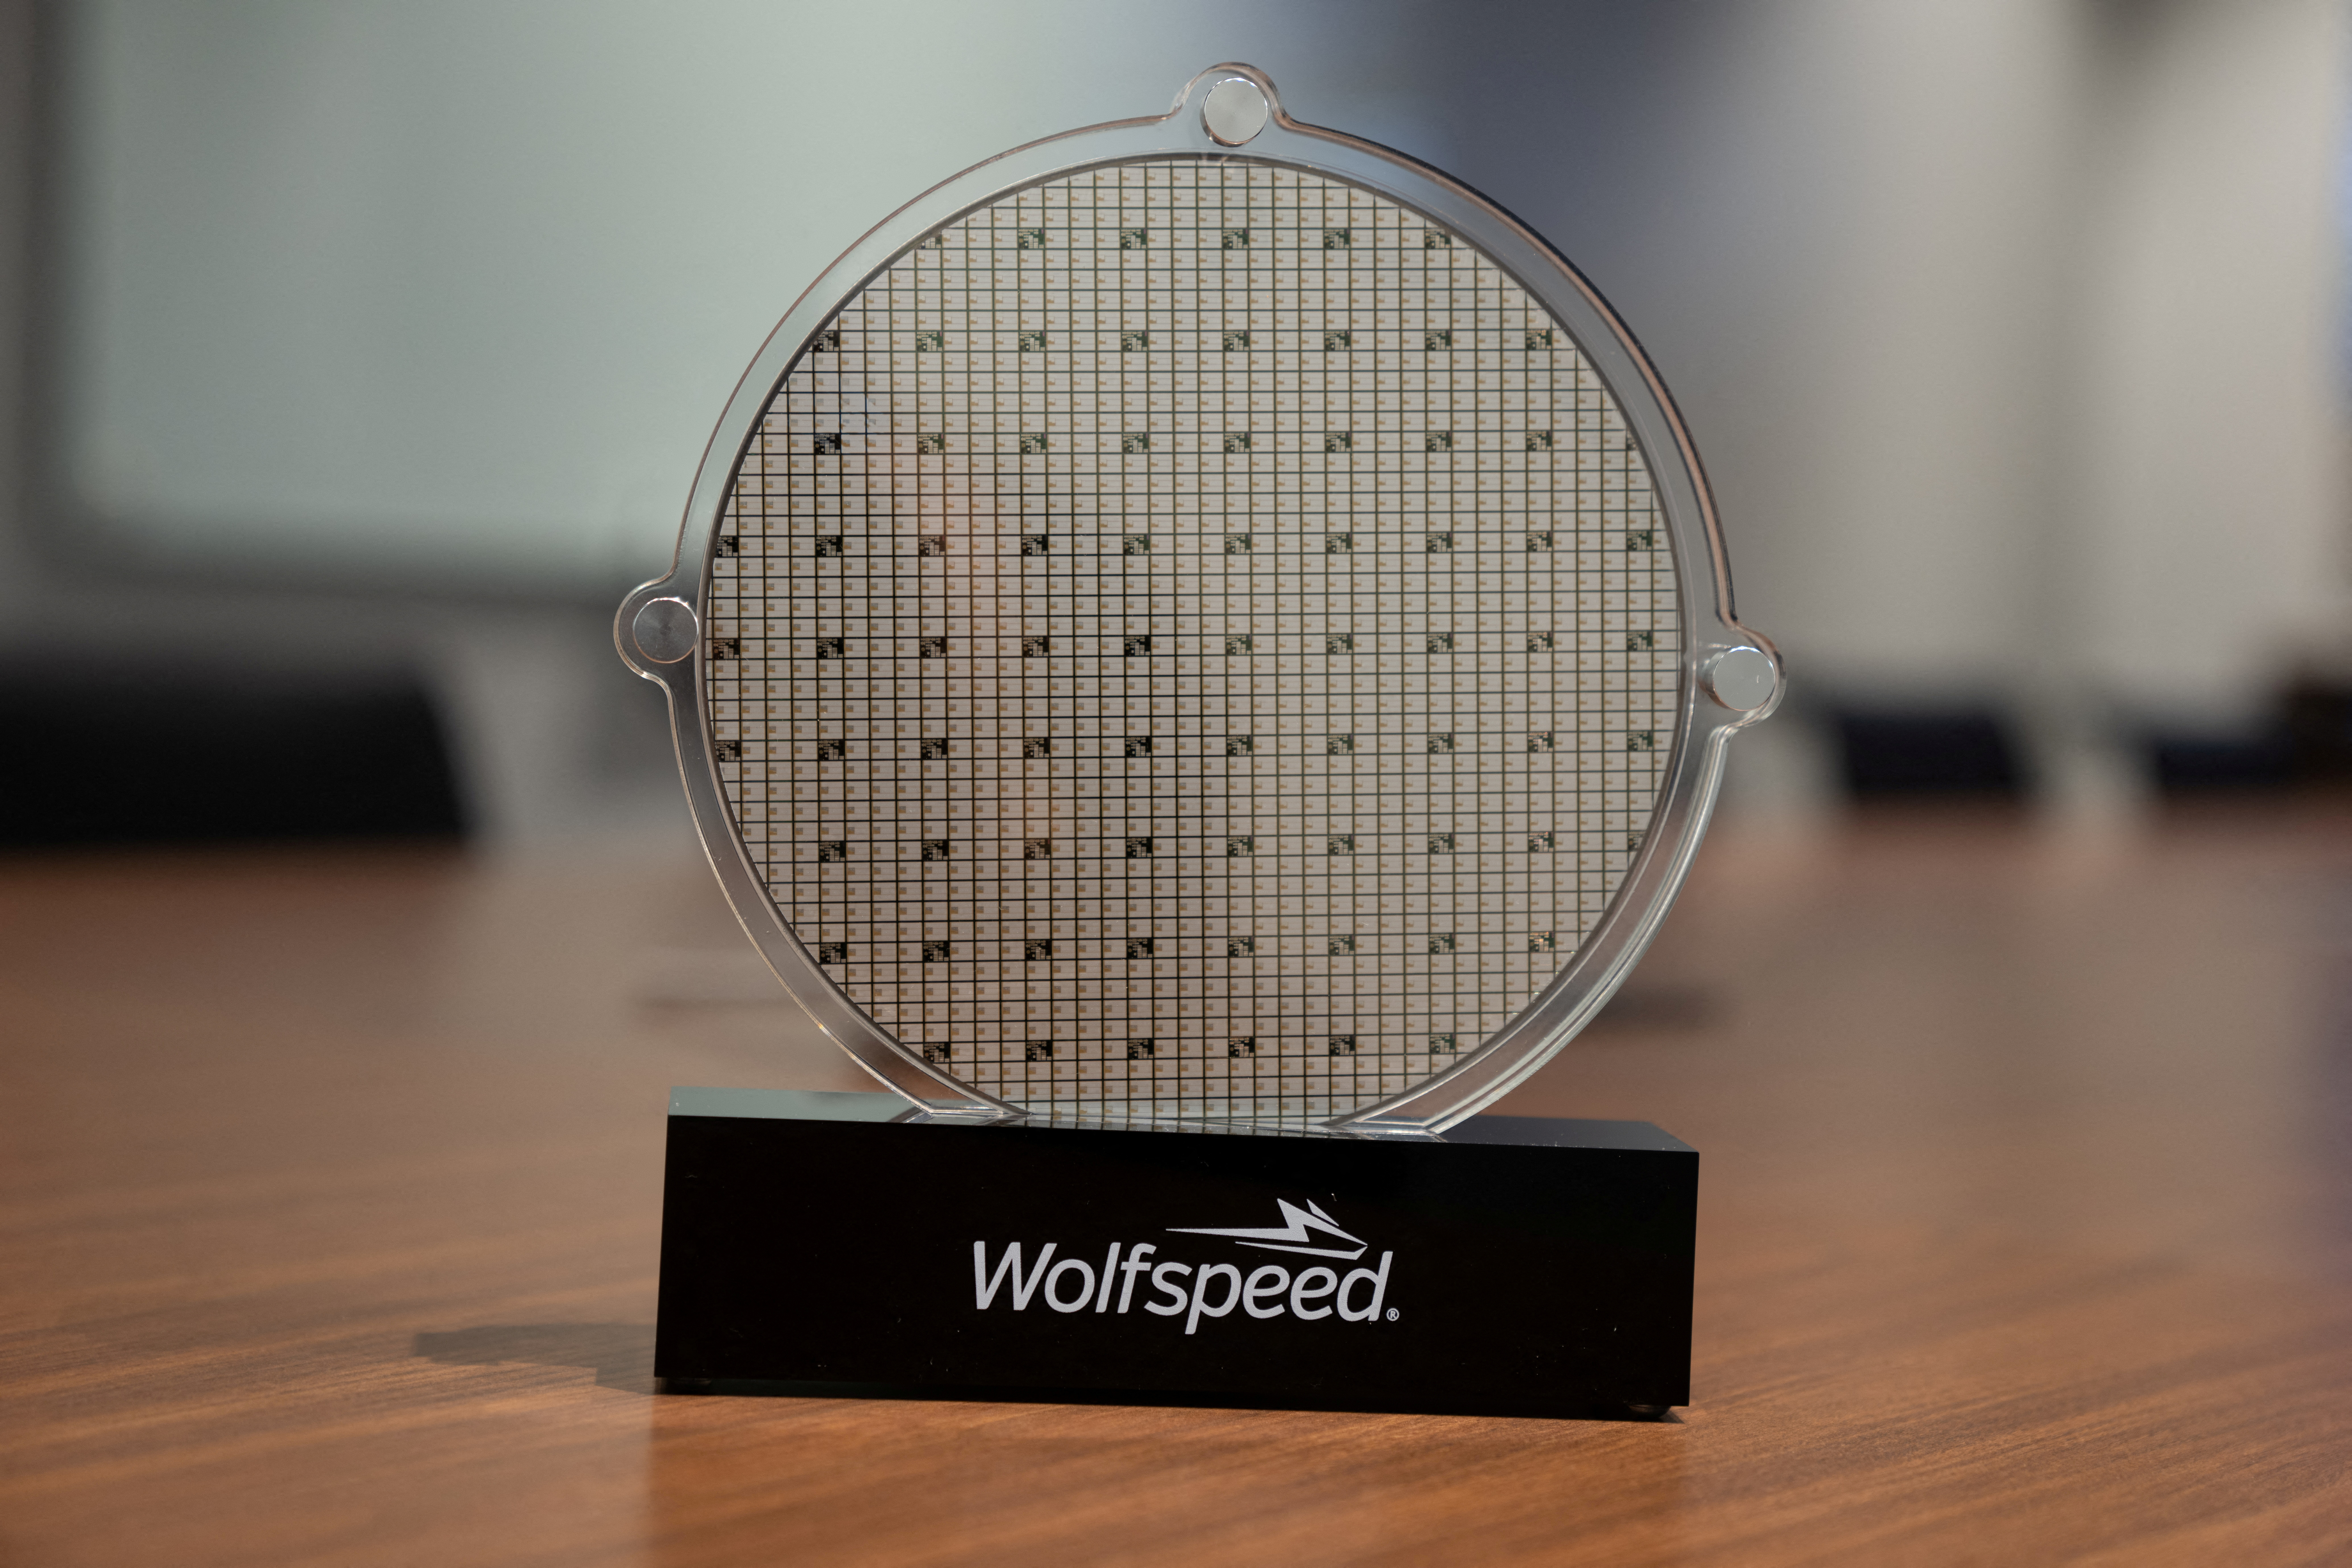 U.S. power chip maker Wolfspeed’s silicon carbide 200mm wafer is seen on display at Wolfspeed’s Mohawk Valley Fab in Marcy, New York, U.S., April 2022. Silicon carbide power chips have been gaining traction with electric car makers as they